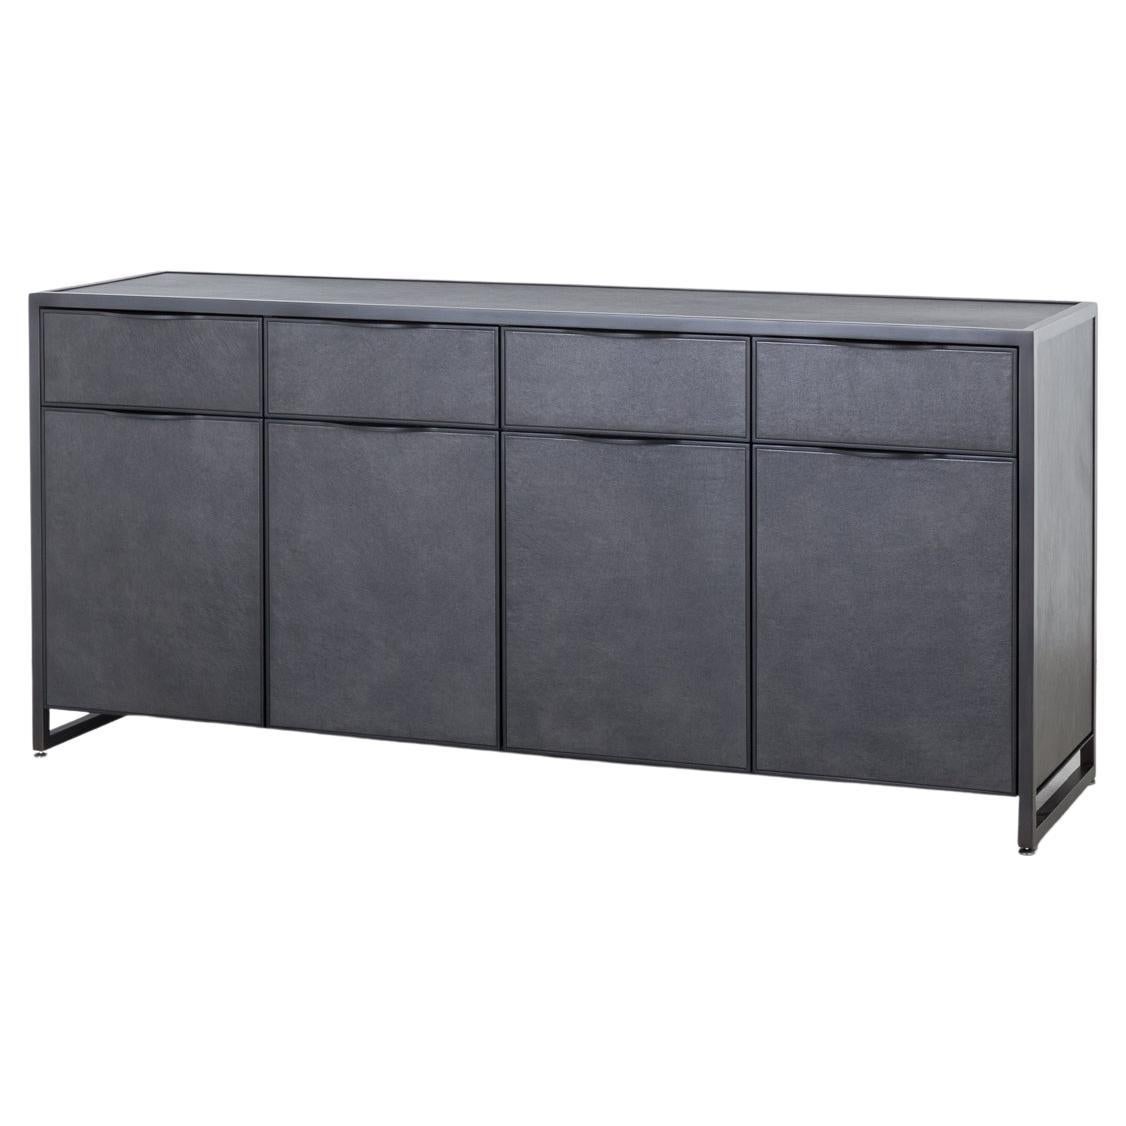 Cairns Credenza 80" For Sale